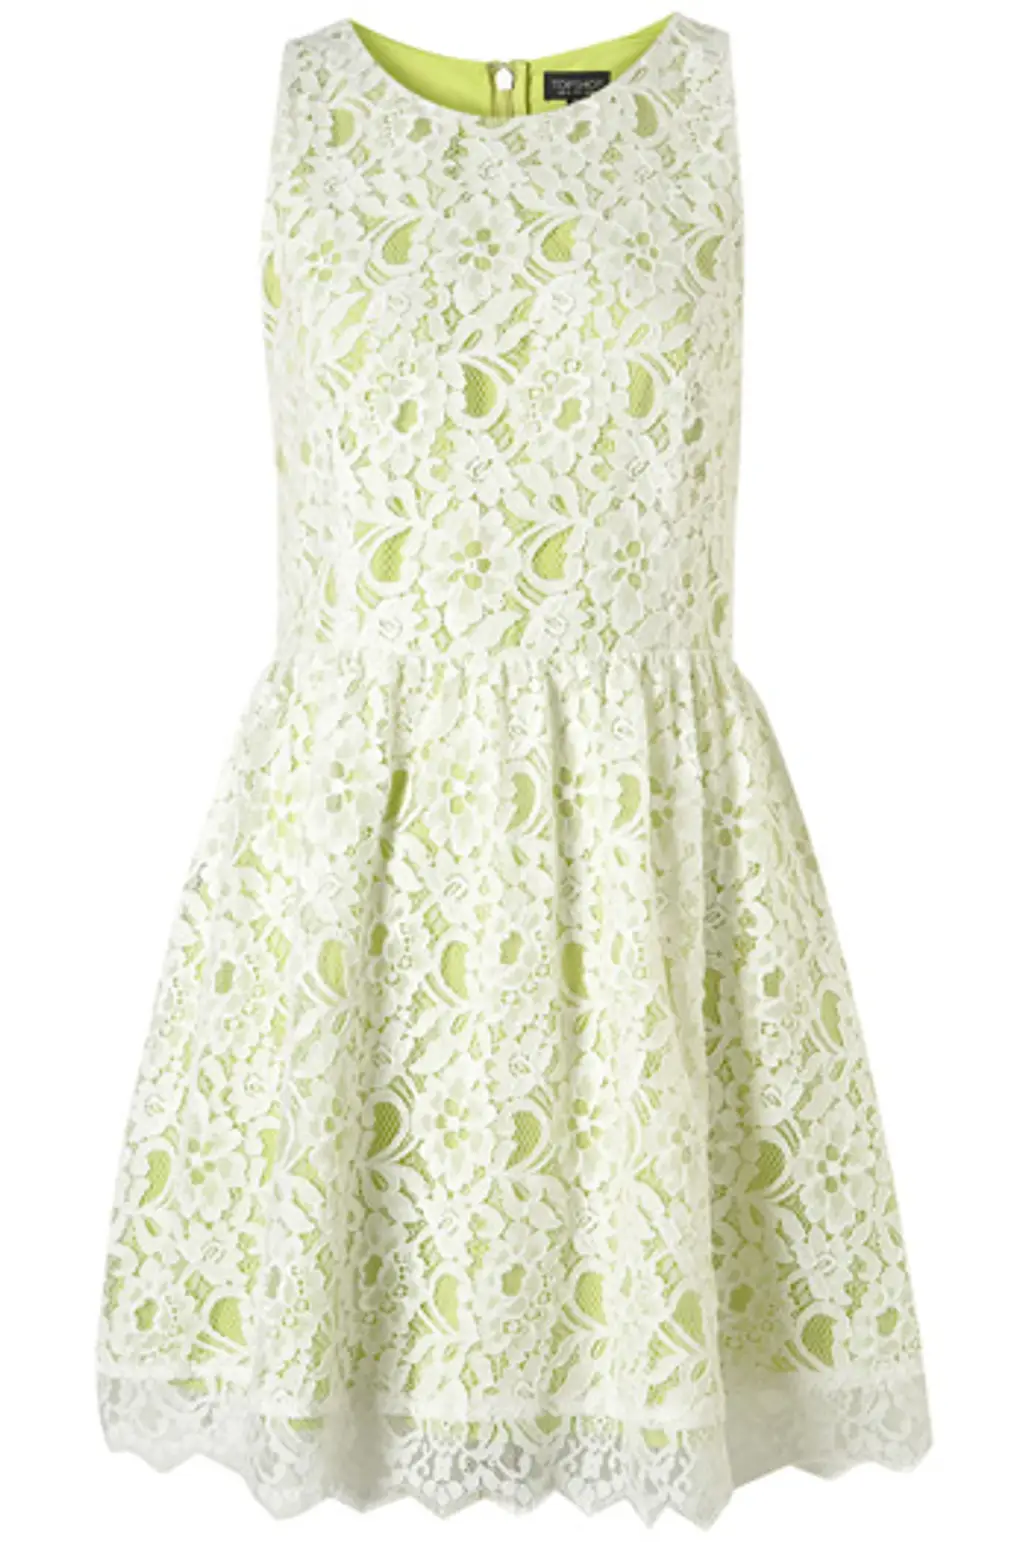 Tosphop Sleeveless Lace Dress